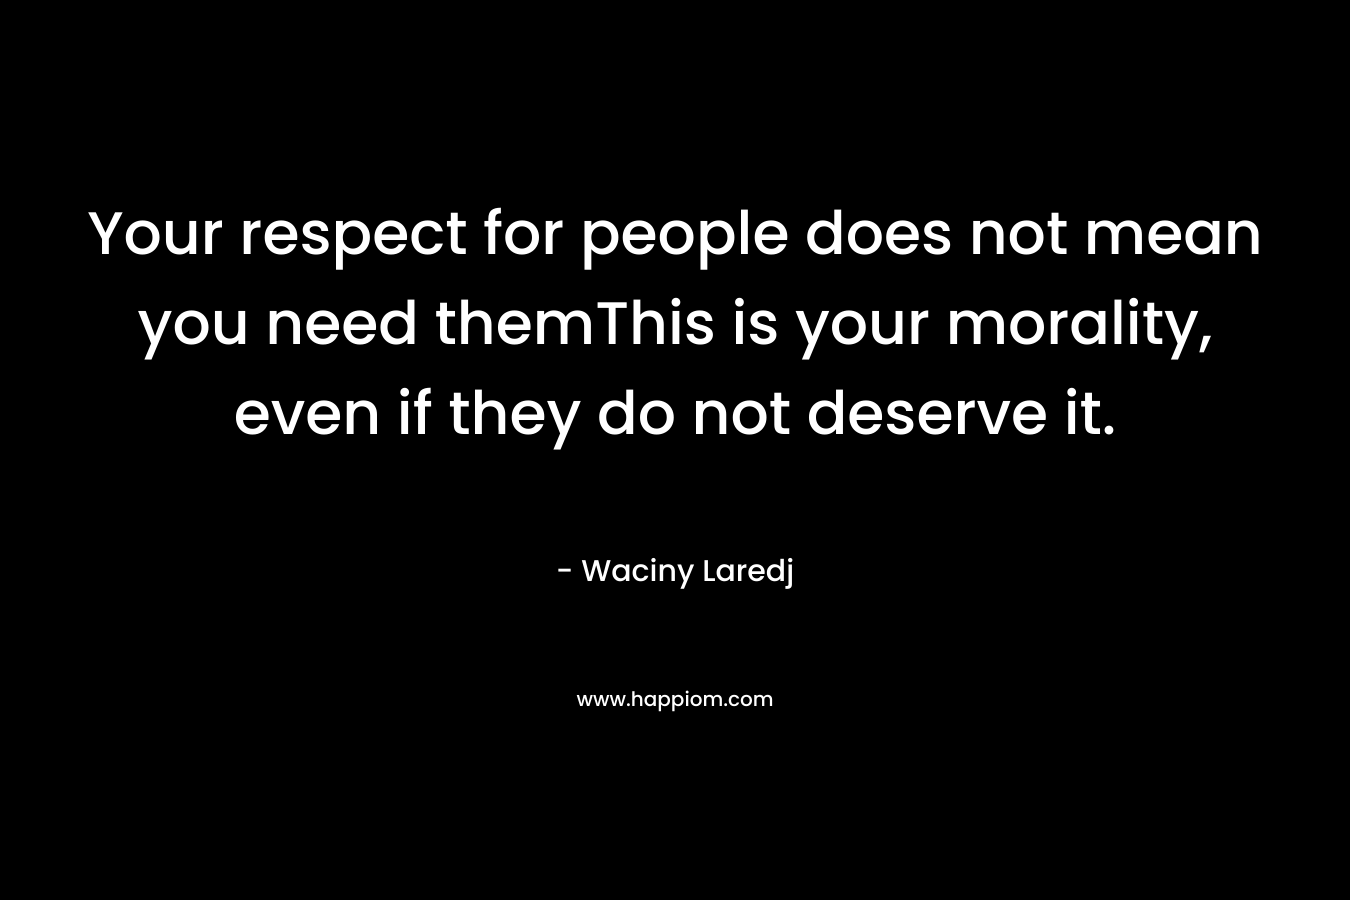 Your respect for people does not mean you need themThis is your morality, even if they do not deserve it. – Waciny Laredj